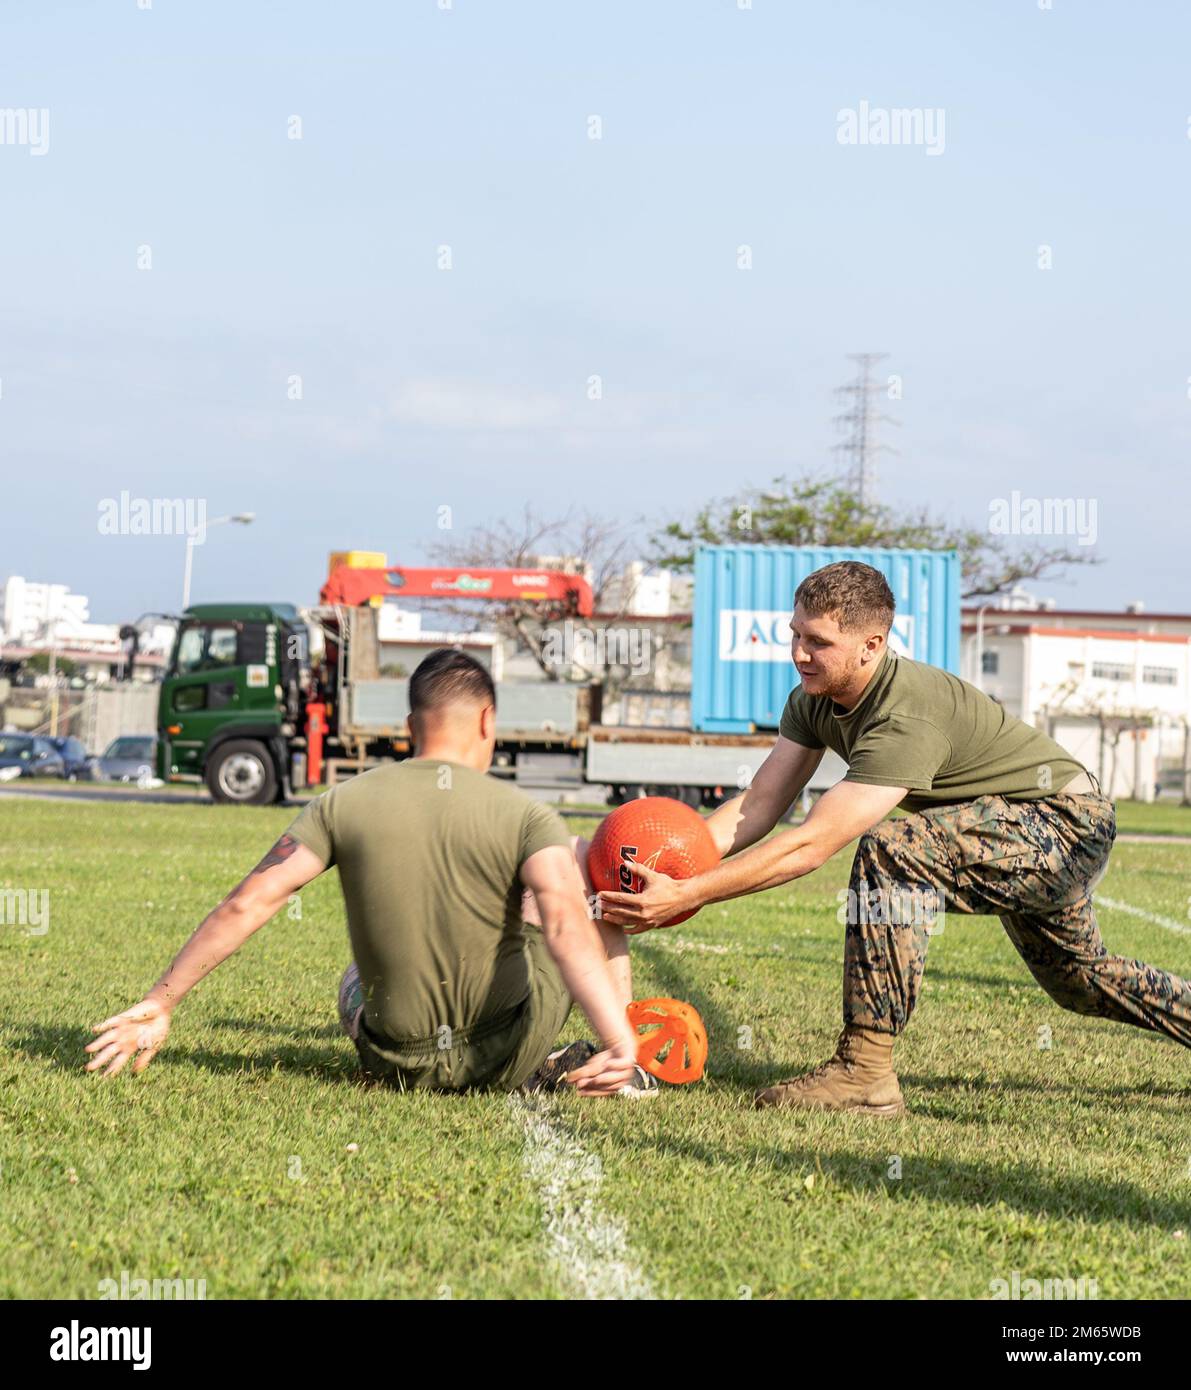 U.S. Marine Corps Pfc. Jesse Brambila, a motor transport operator with 3rd Transportation Battalion, Combat Logistics Regiment 3, 3rd Marine Logistics Group, tags a competitor with a ball during a field meet at Camp Foster, Okinawa, Japan, April 5, 2022. 3rd TB conducted a competitive field meet in order to boost morale amongst their Marines. 3rd MLG, based out of Okinawa, Japan, is a forward-deployed combat unit that serves as III MEF’s comprehensive logistics and combat service support backbone for operations throughout the Indo-Pacific area of responsibility. Stock Photo